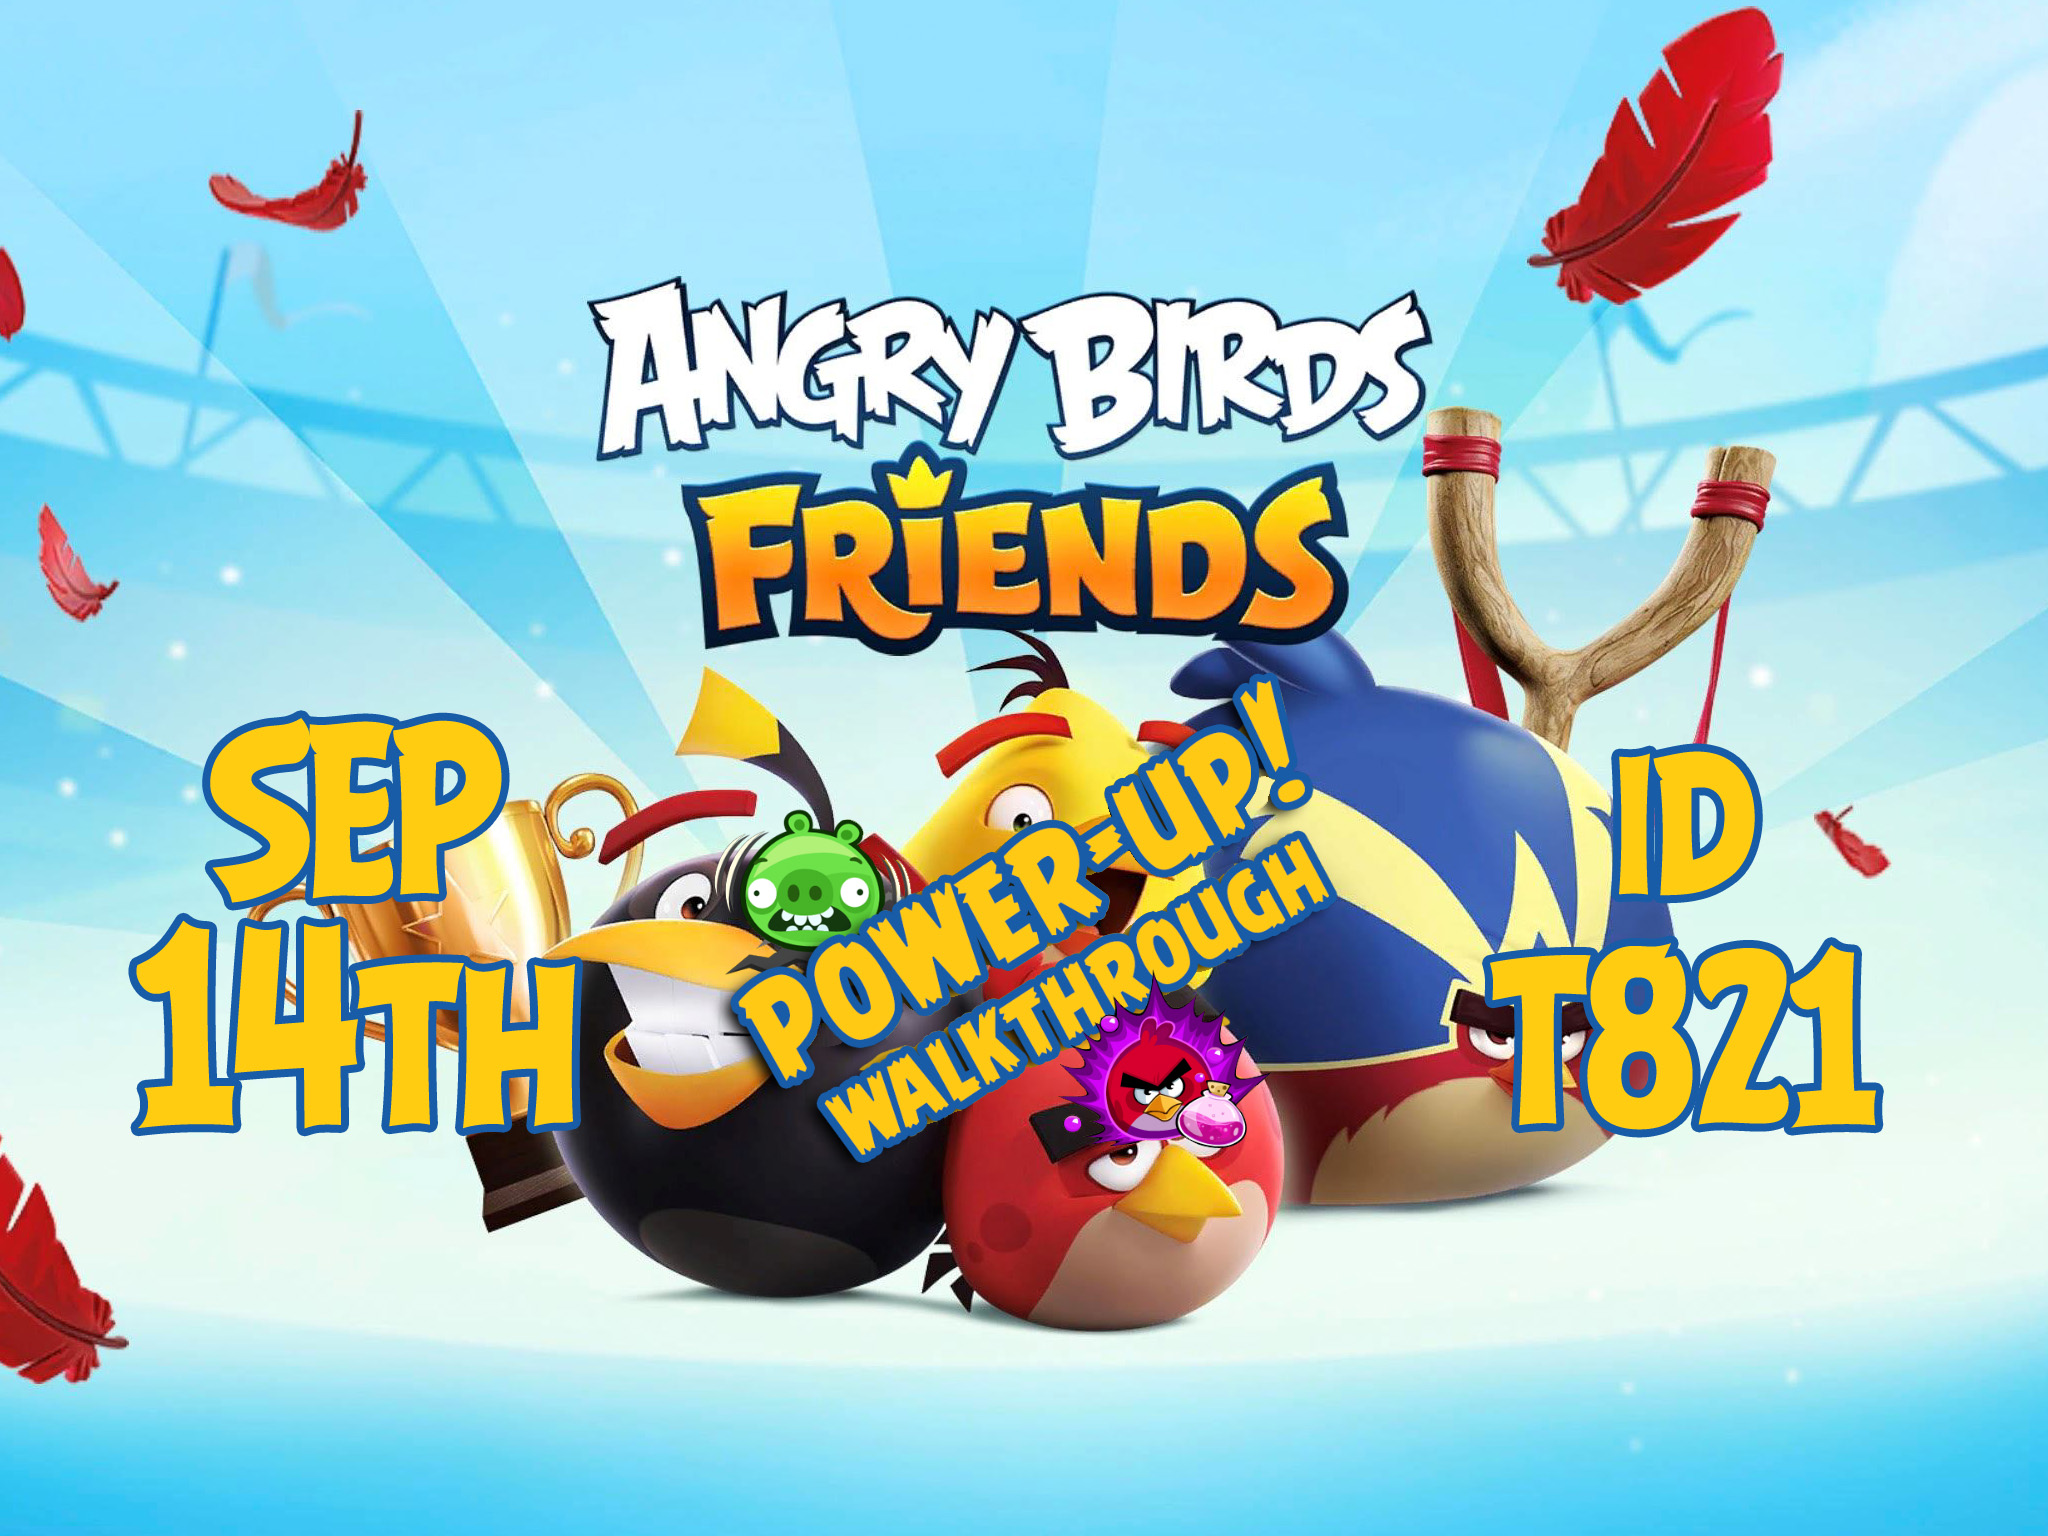 Angry-Birds-Friends-Tournament-T821-Feature-Image-PU